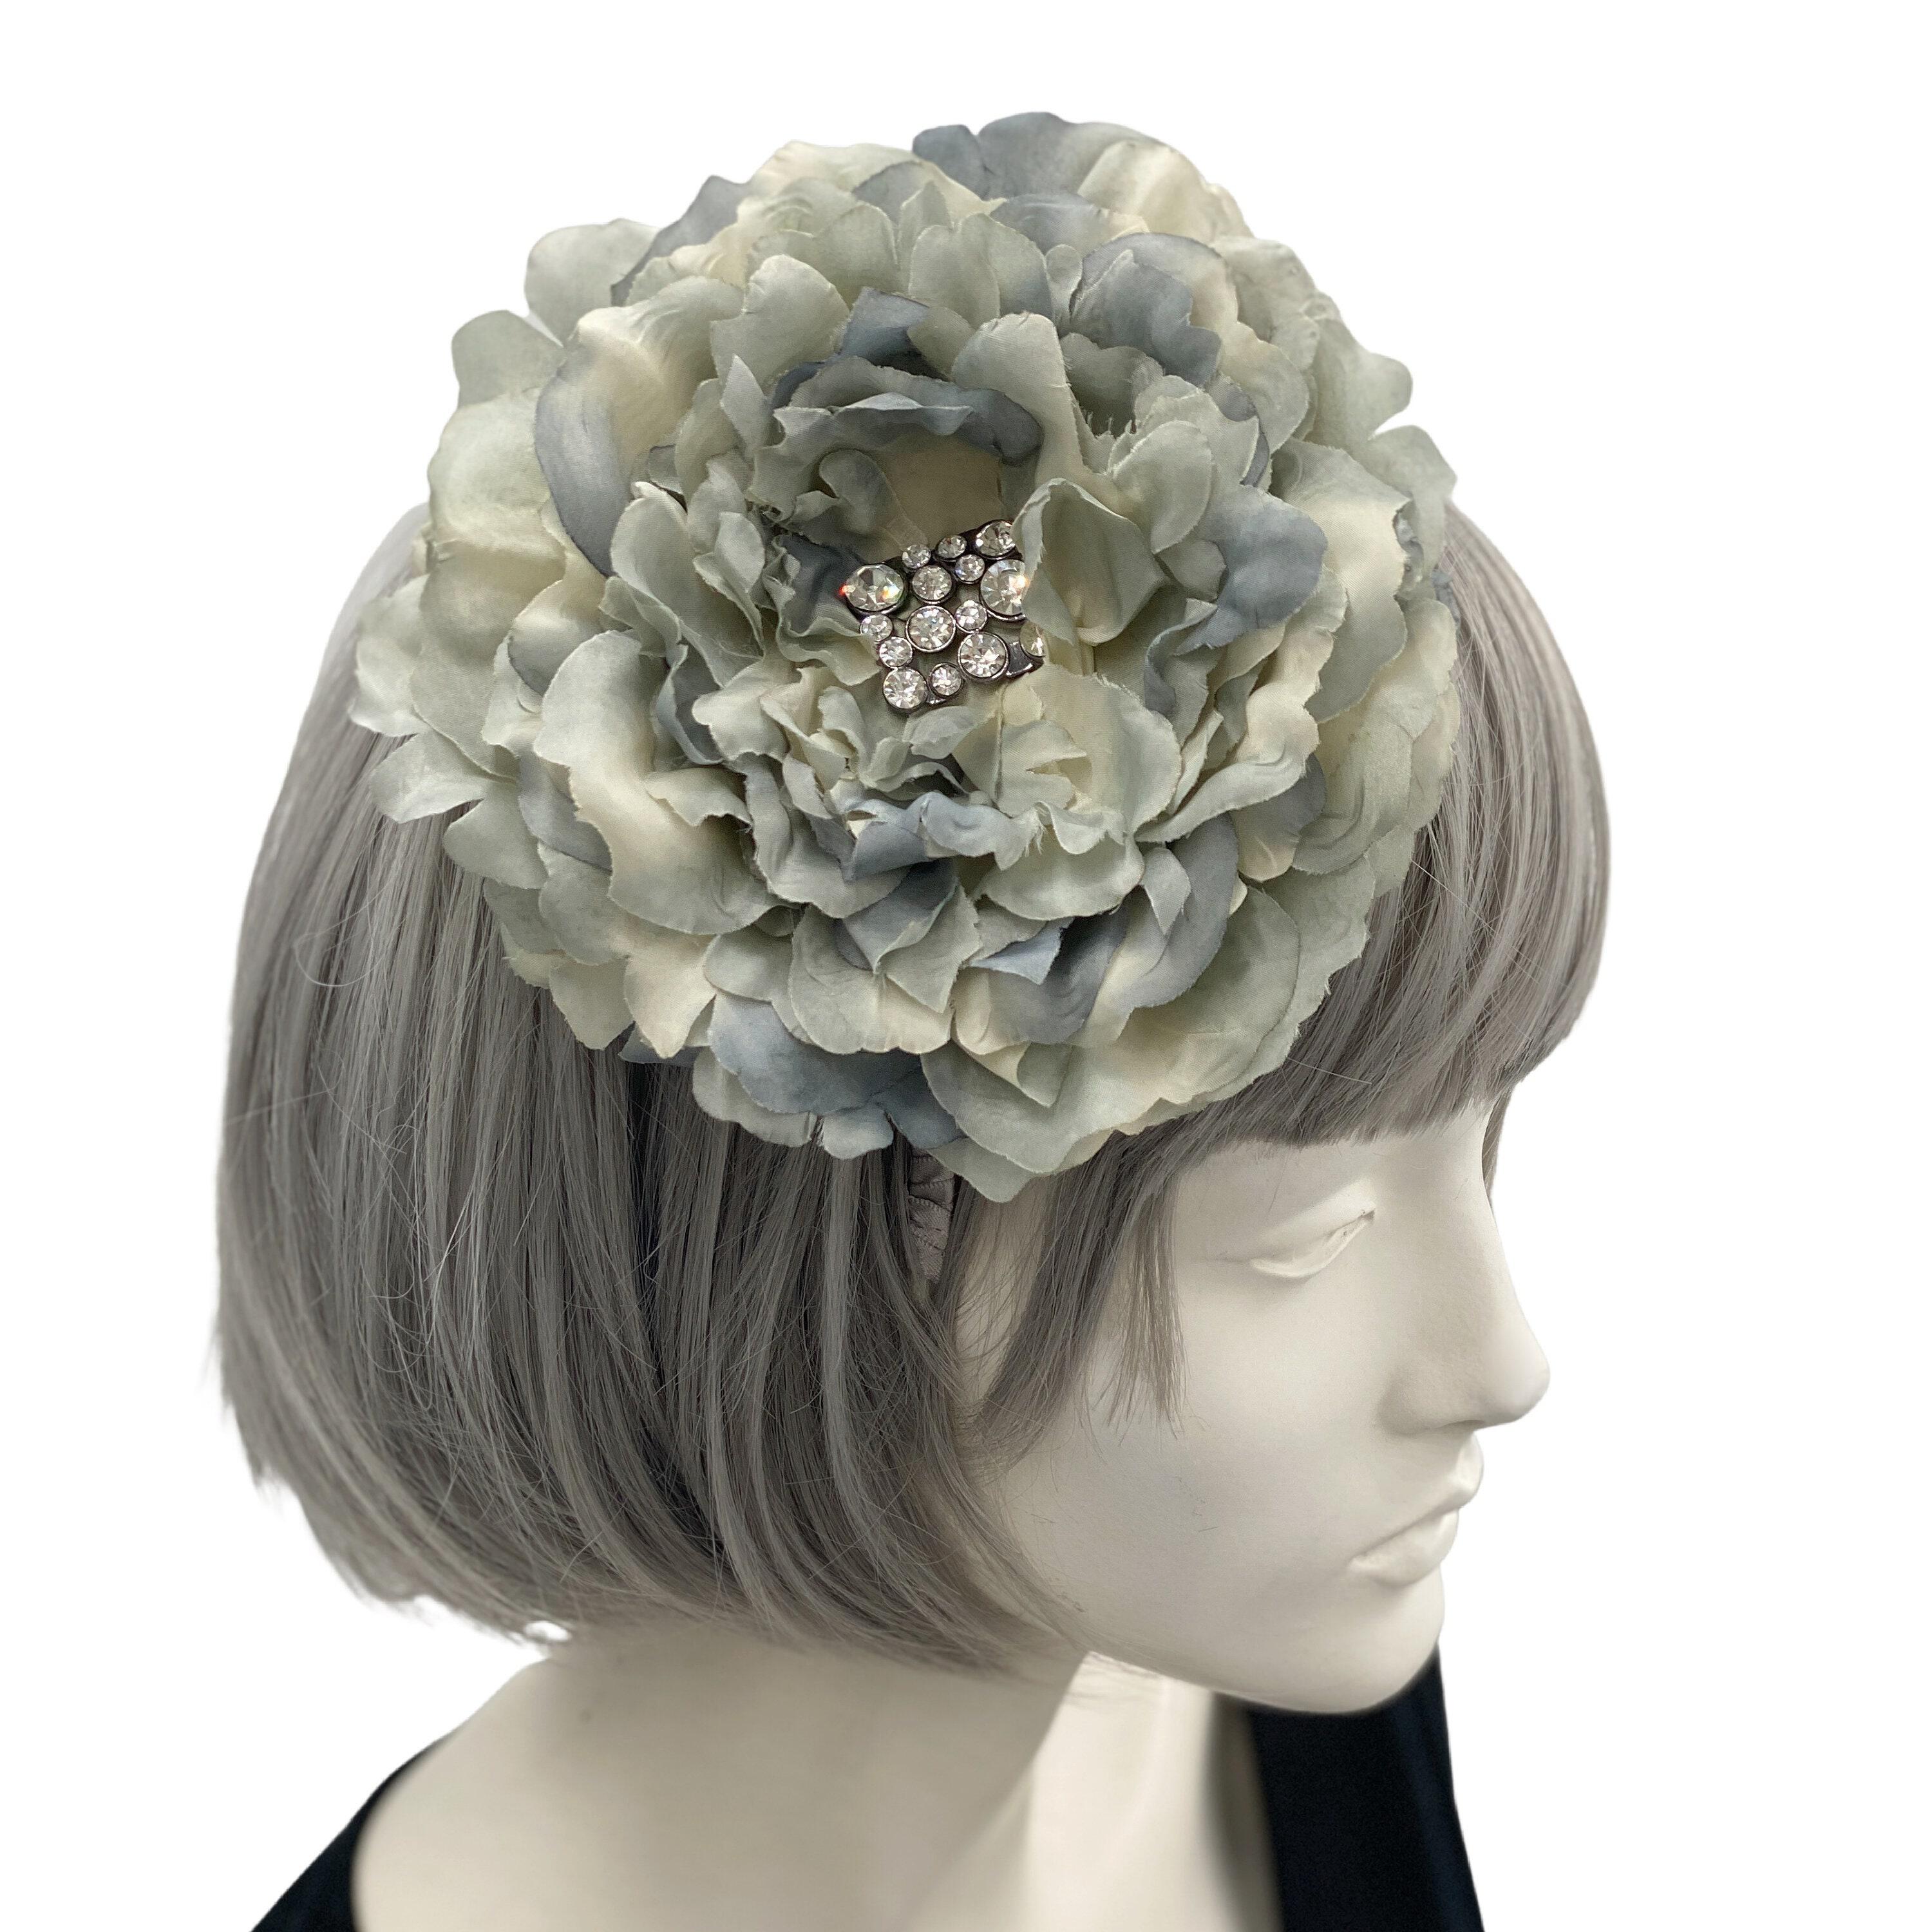 Products Hair Flower, Silver Fascinator, Gray Flower